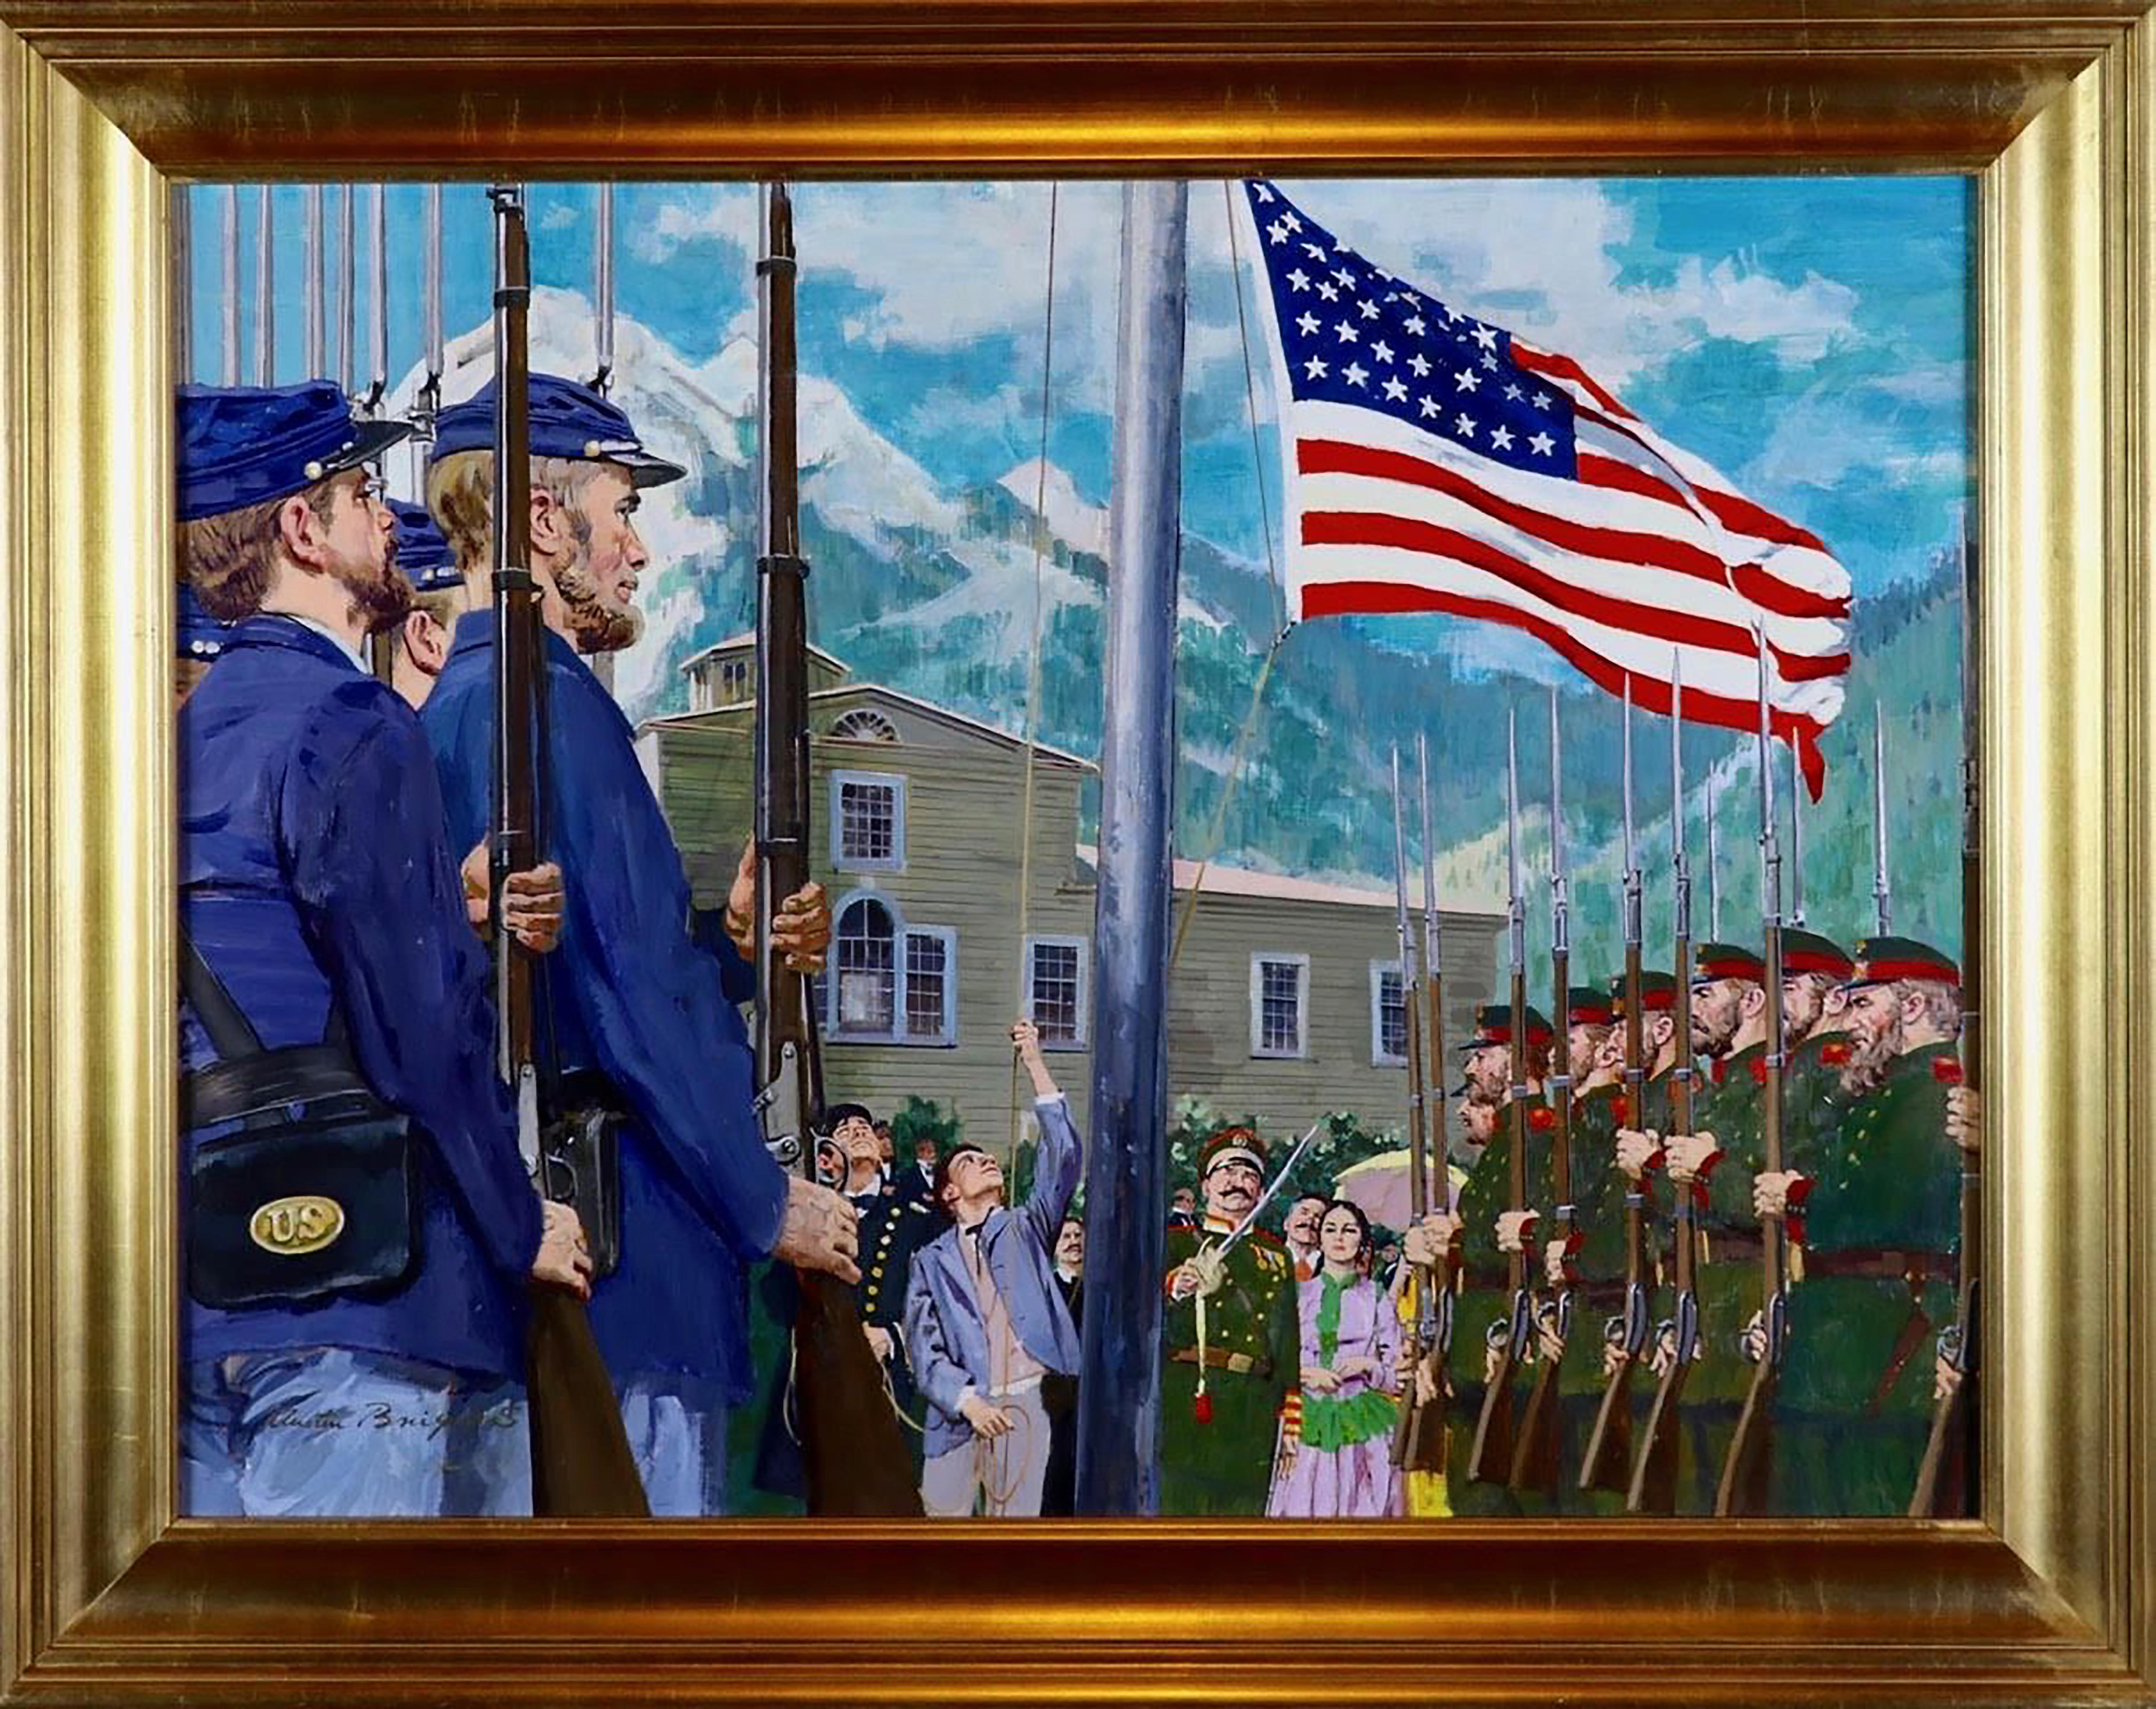 Old Glory Rises Over Alaska  - Painting by Austin Briggs